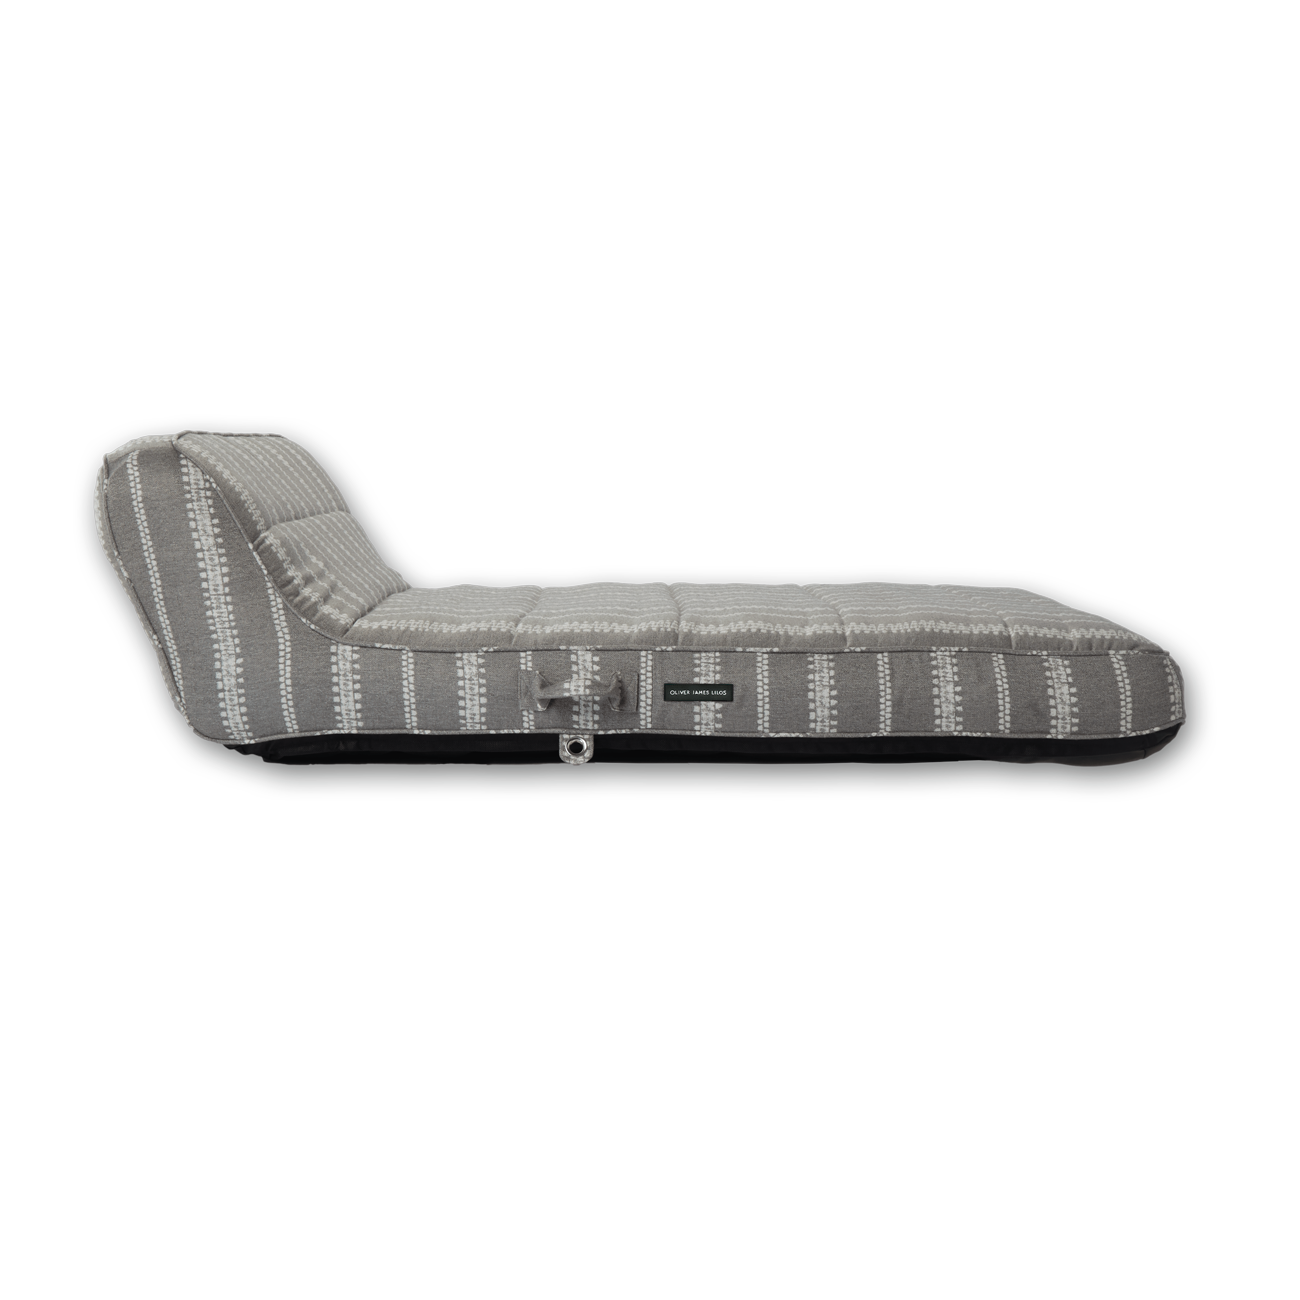 The side of a luxury pool float in grey and white striped fabric.